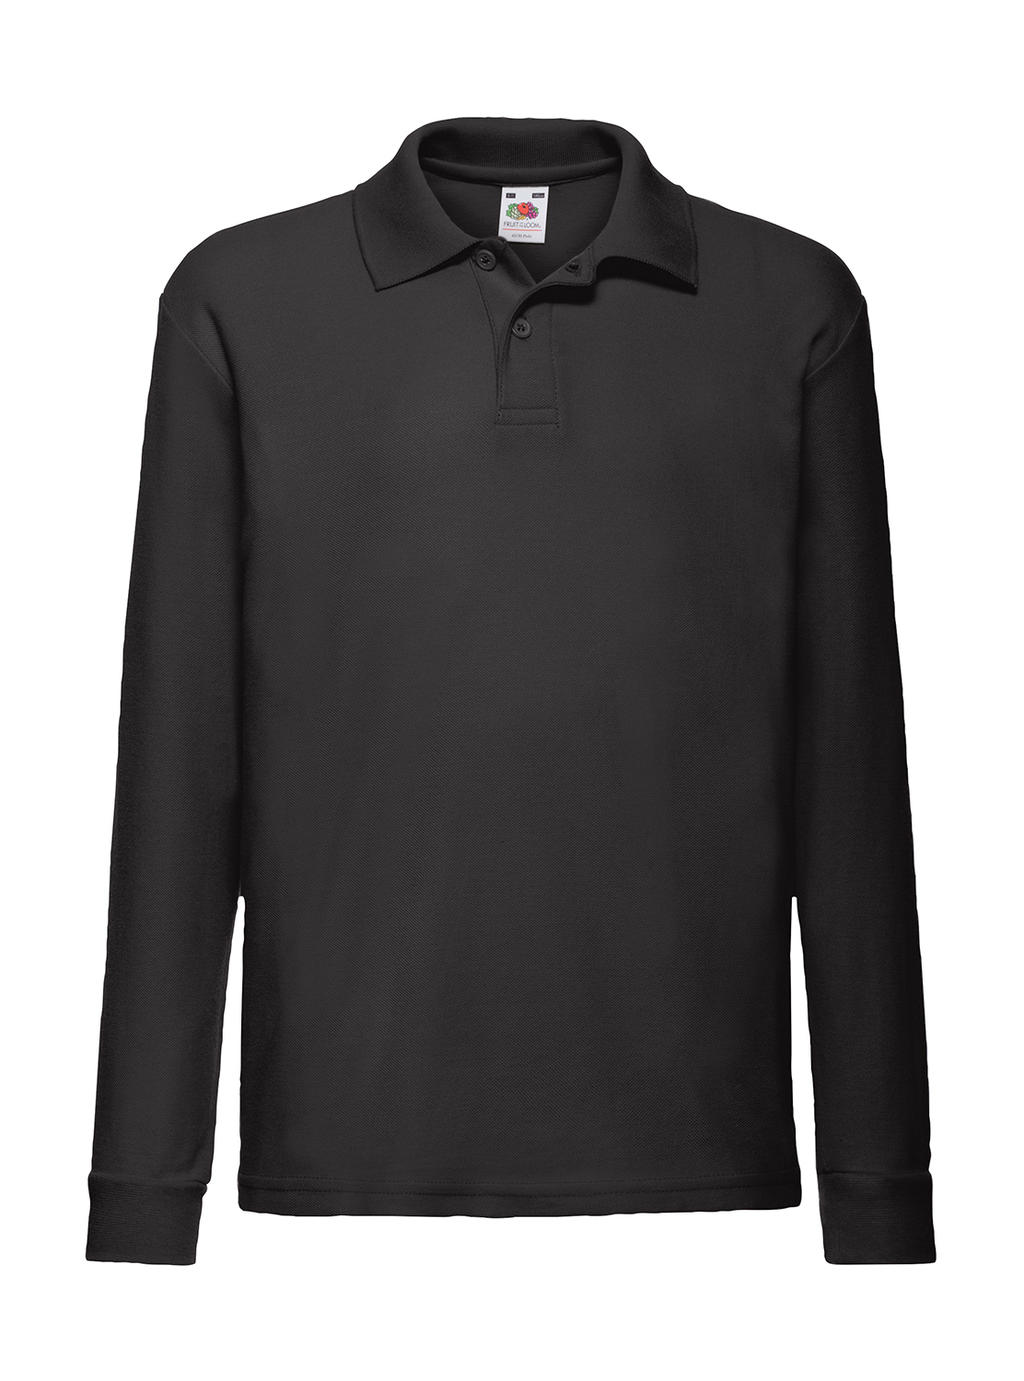  Kids 65/35 Long Sleeve Polo in Farbe Black